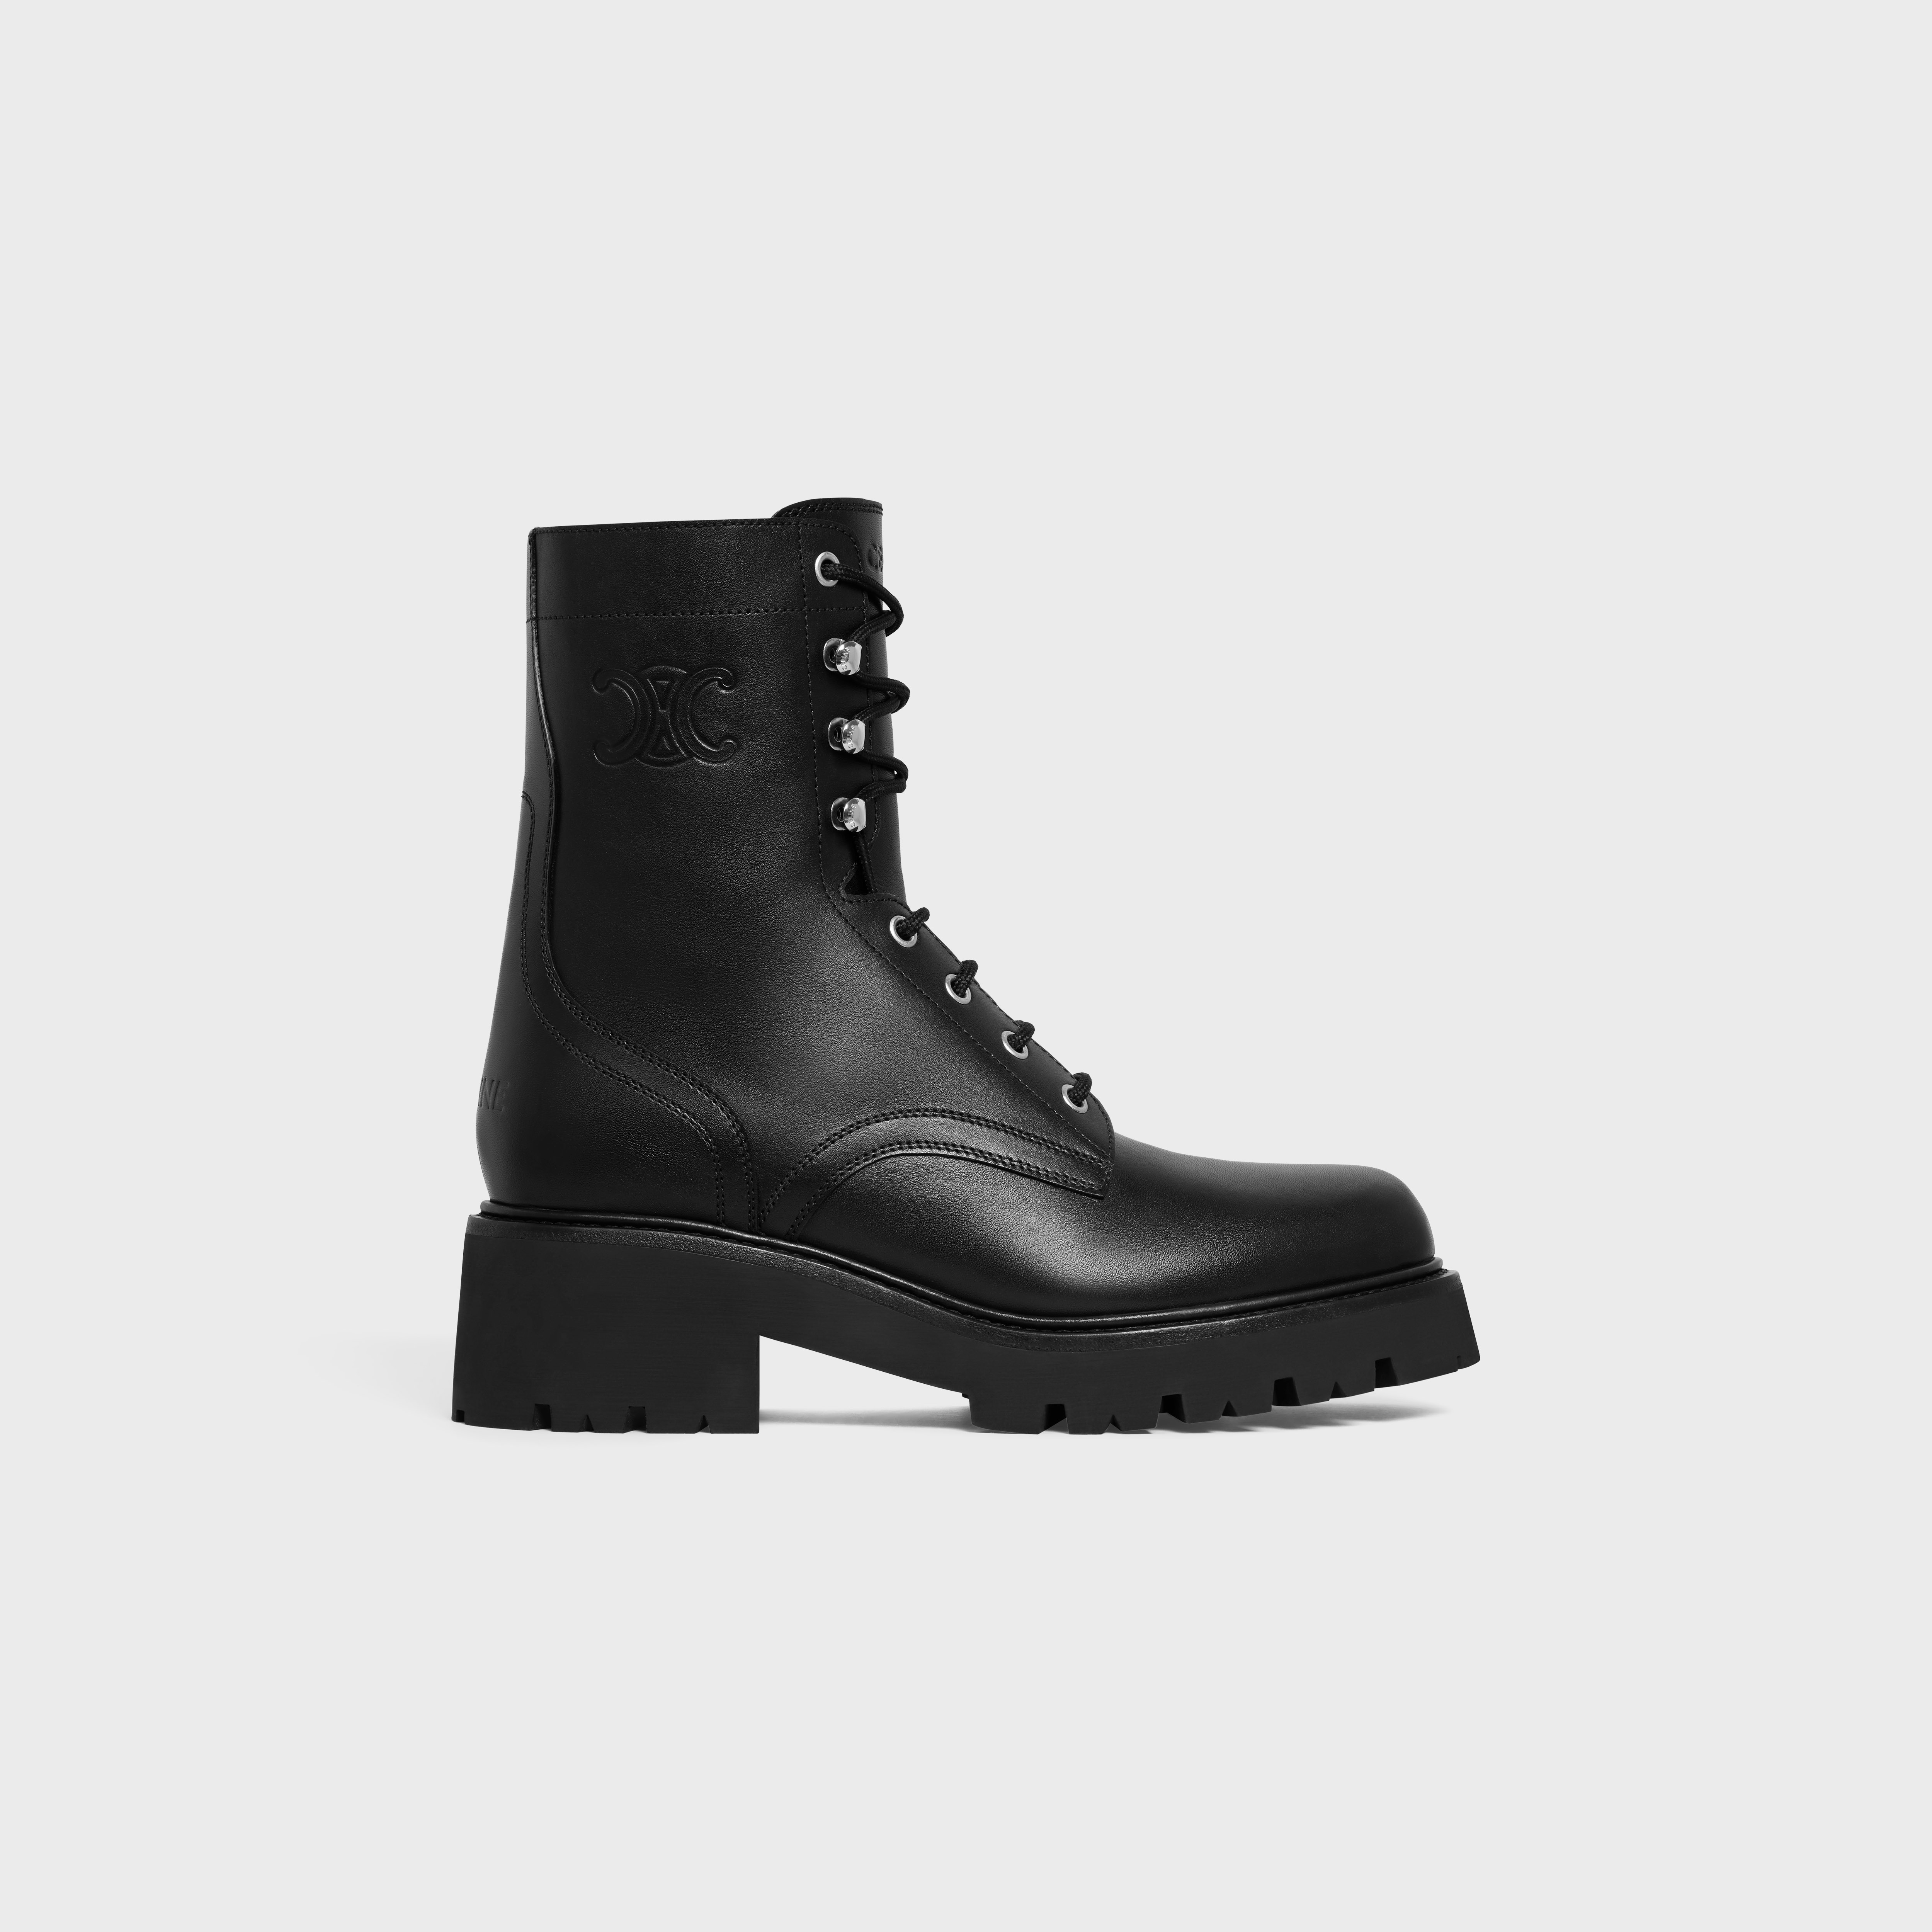 CELINE TRIOMPHE RANGERS MID LACE-UP BOOT in SHINY BULLSKIN - 1